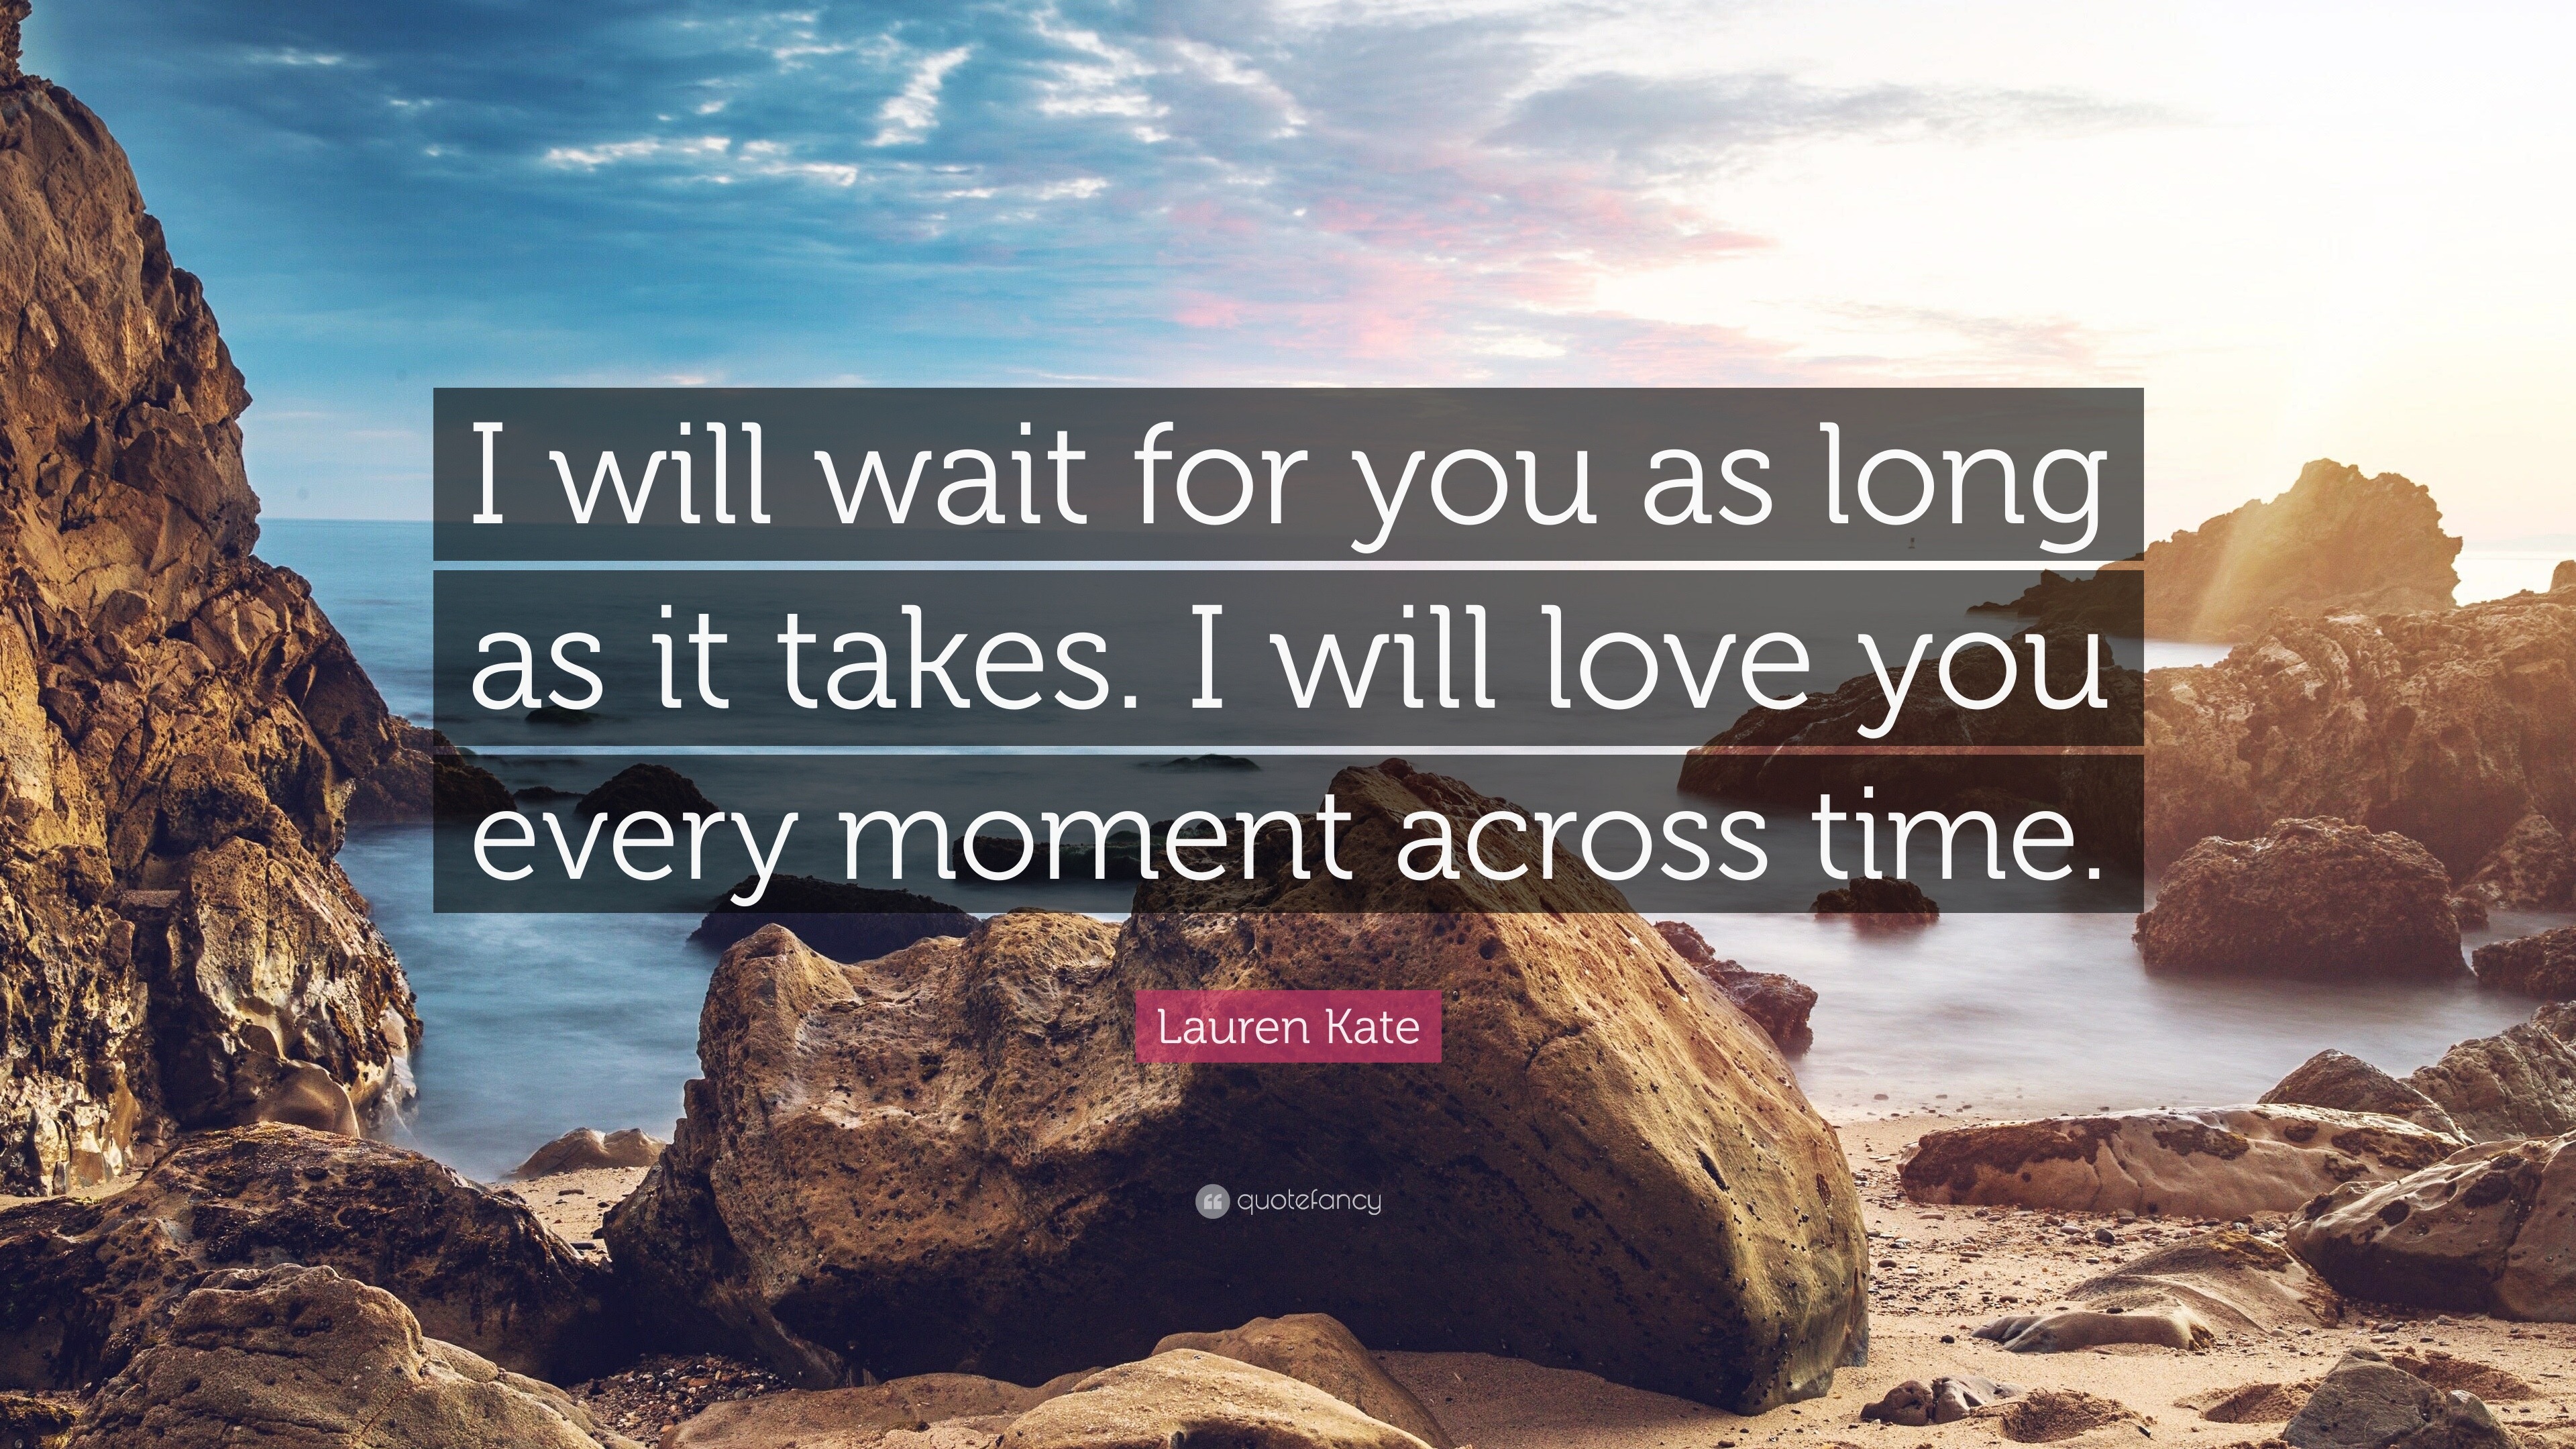 Lauren Kate Quote “I will wait for you as long as it takes